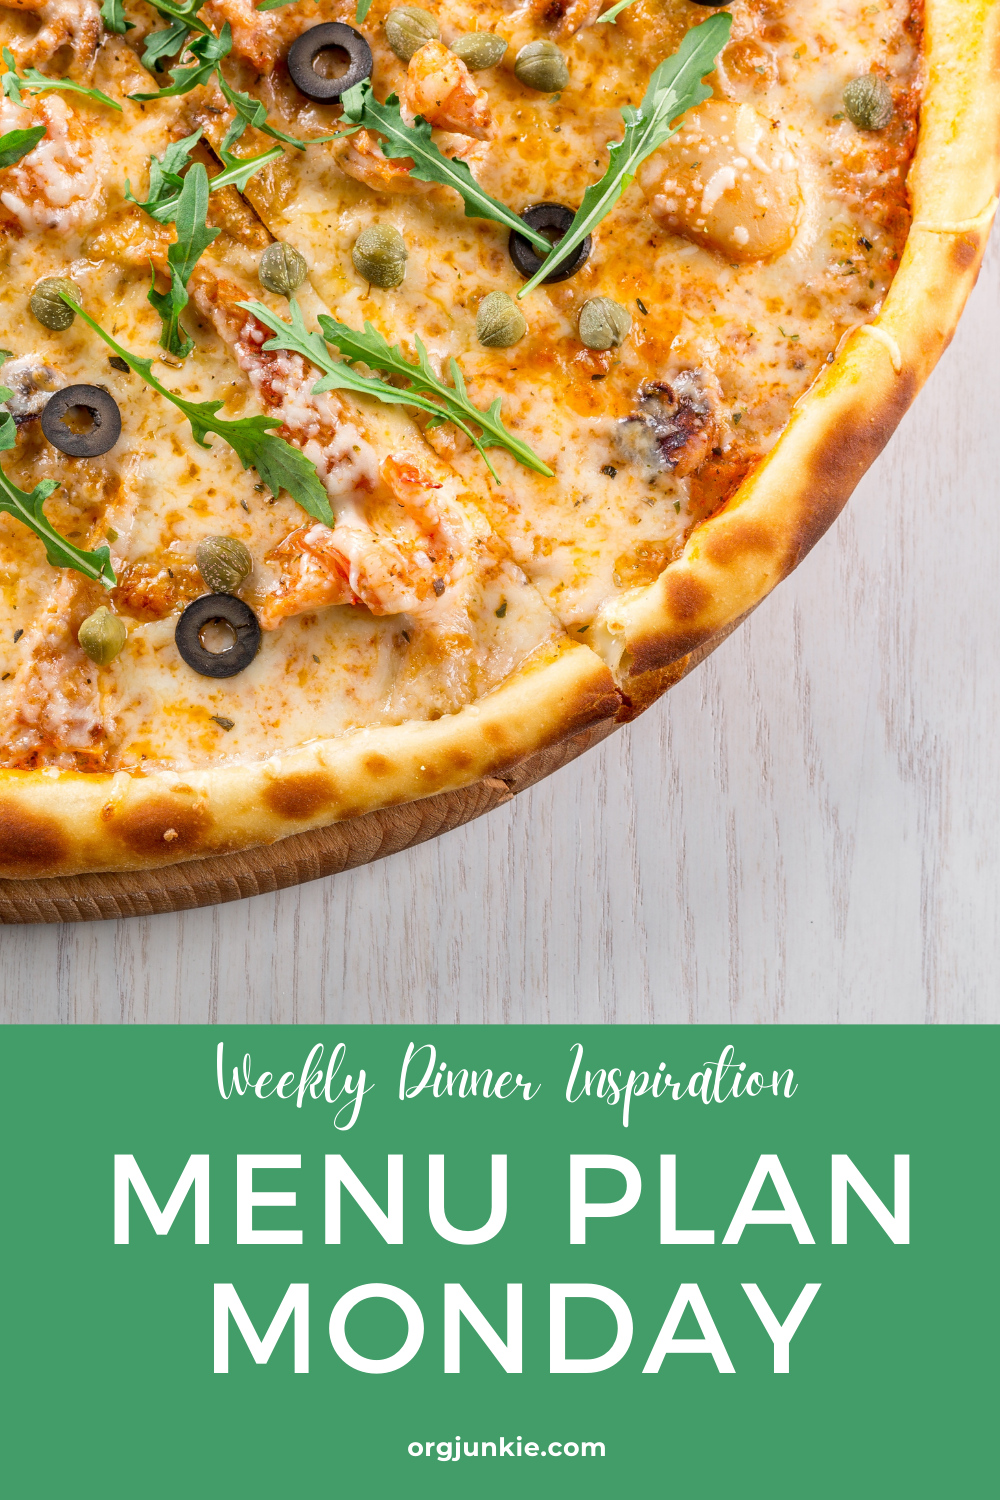 Menu Plan Monday for the week of Nov 16/20 ~ weekly dinner inspiration at I'm an Organizing Junkie